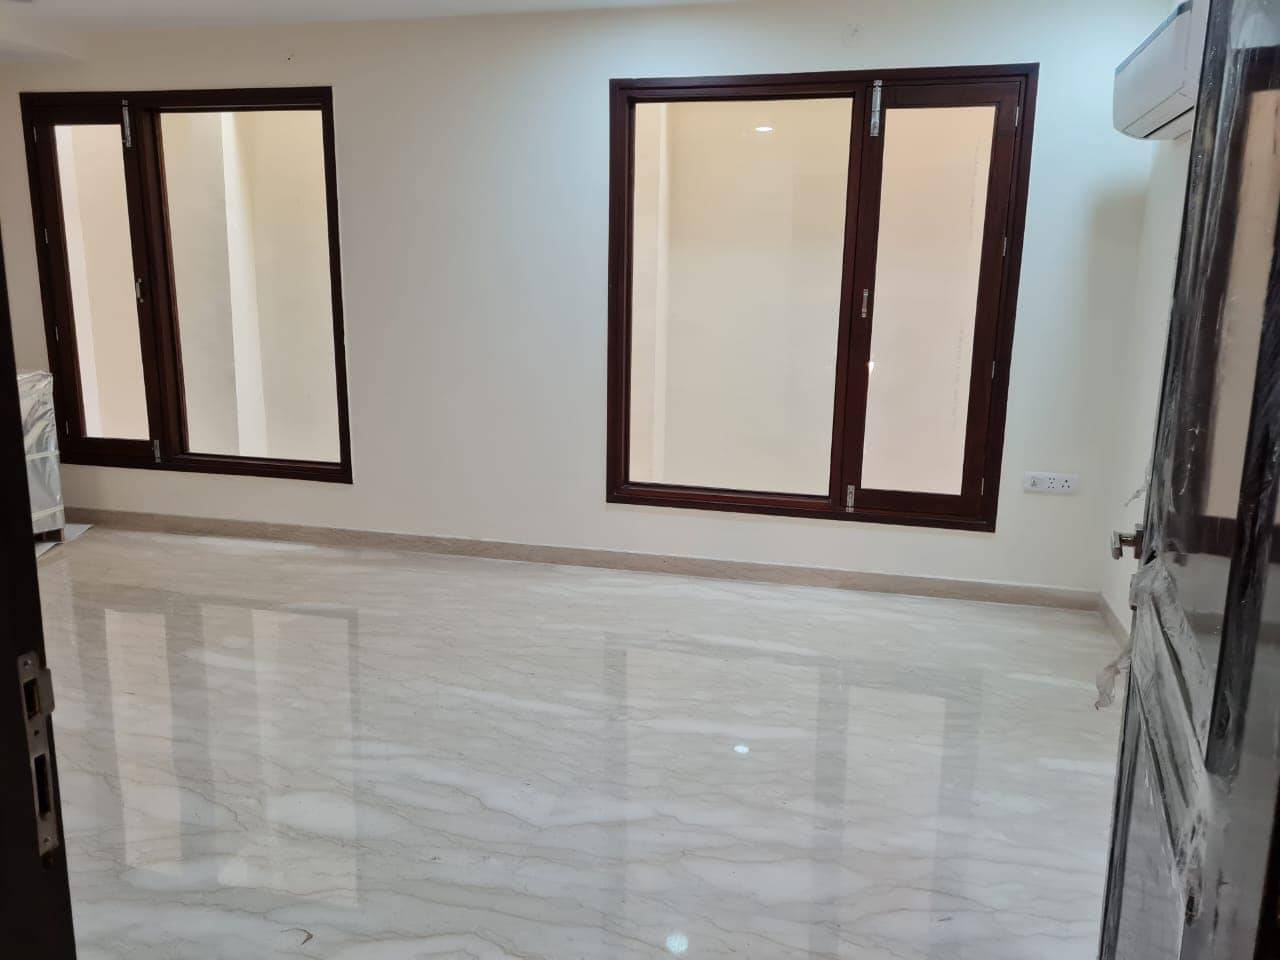 3 Bed/ 3 Bath Rent Apartment/ Flat; 2,700 sq. ft. carpet area, Semi Furnished for rent @Greater Kailash  New delhi